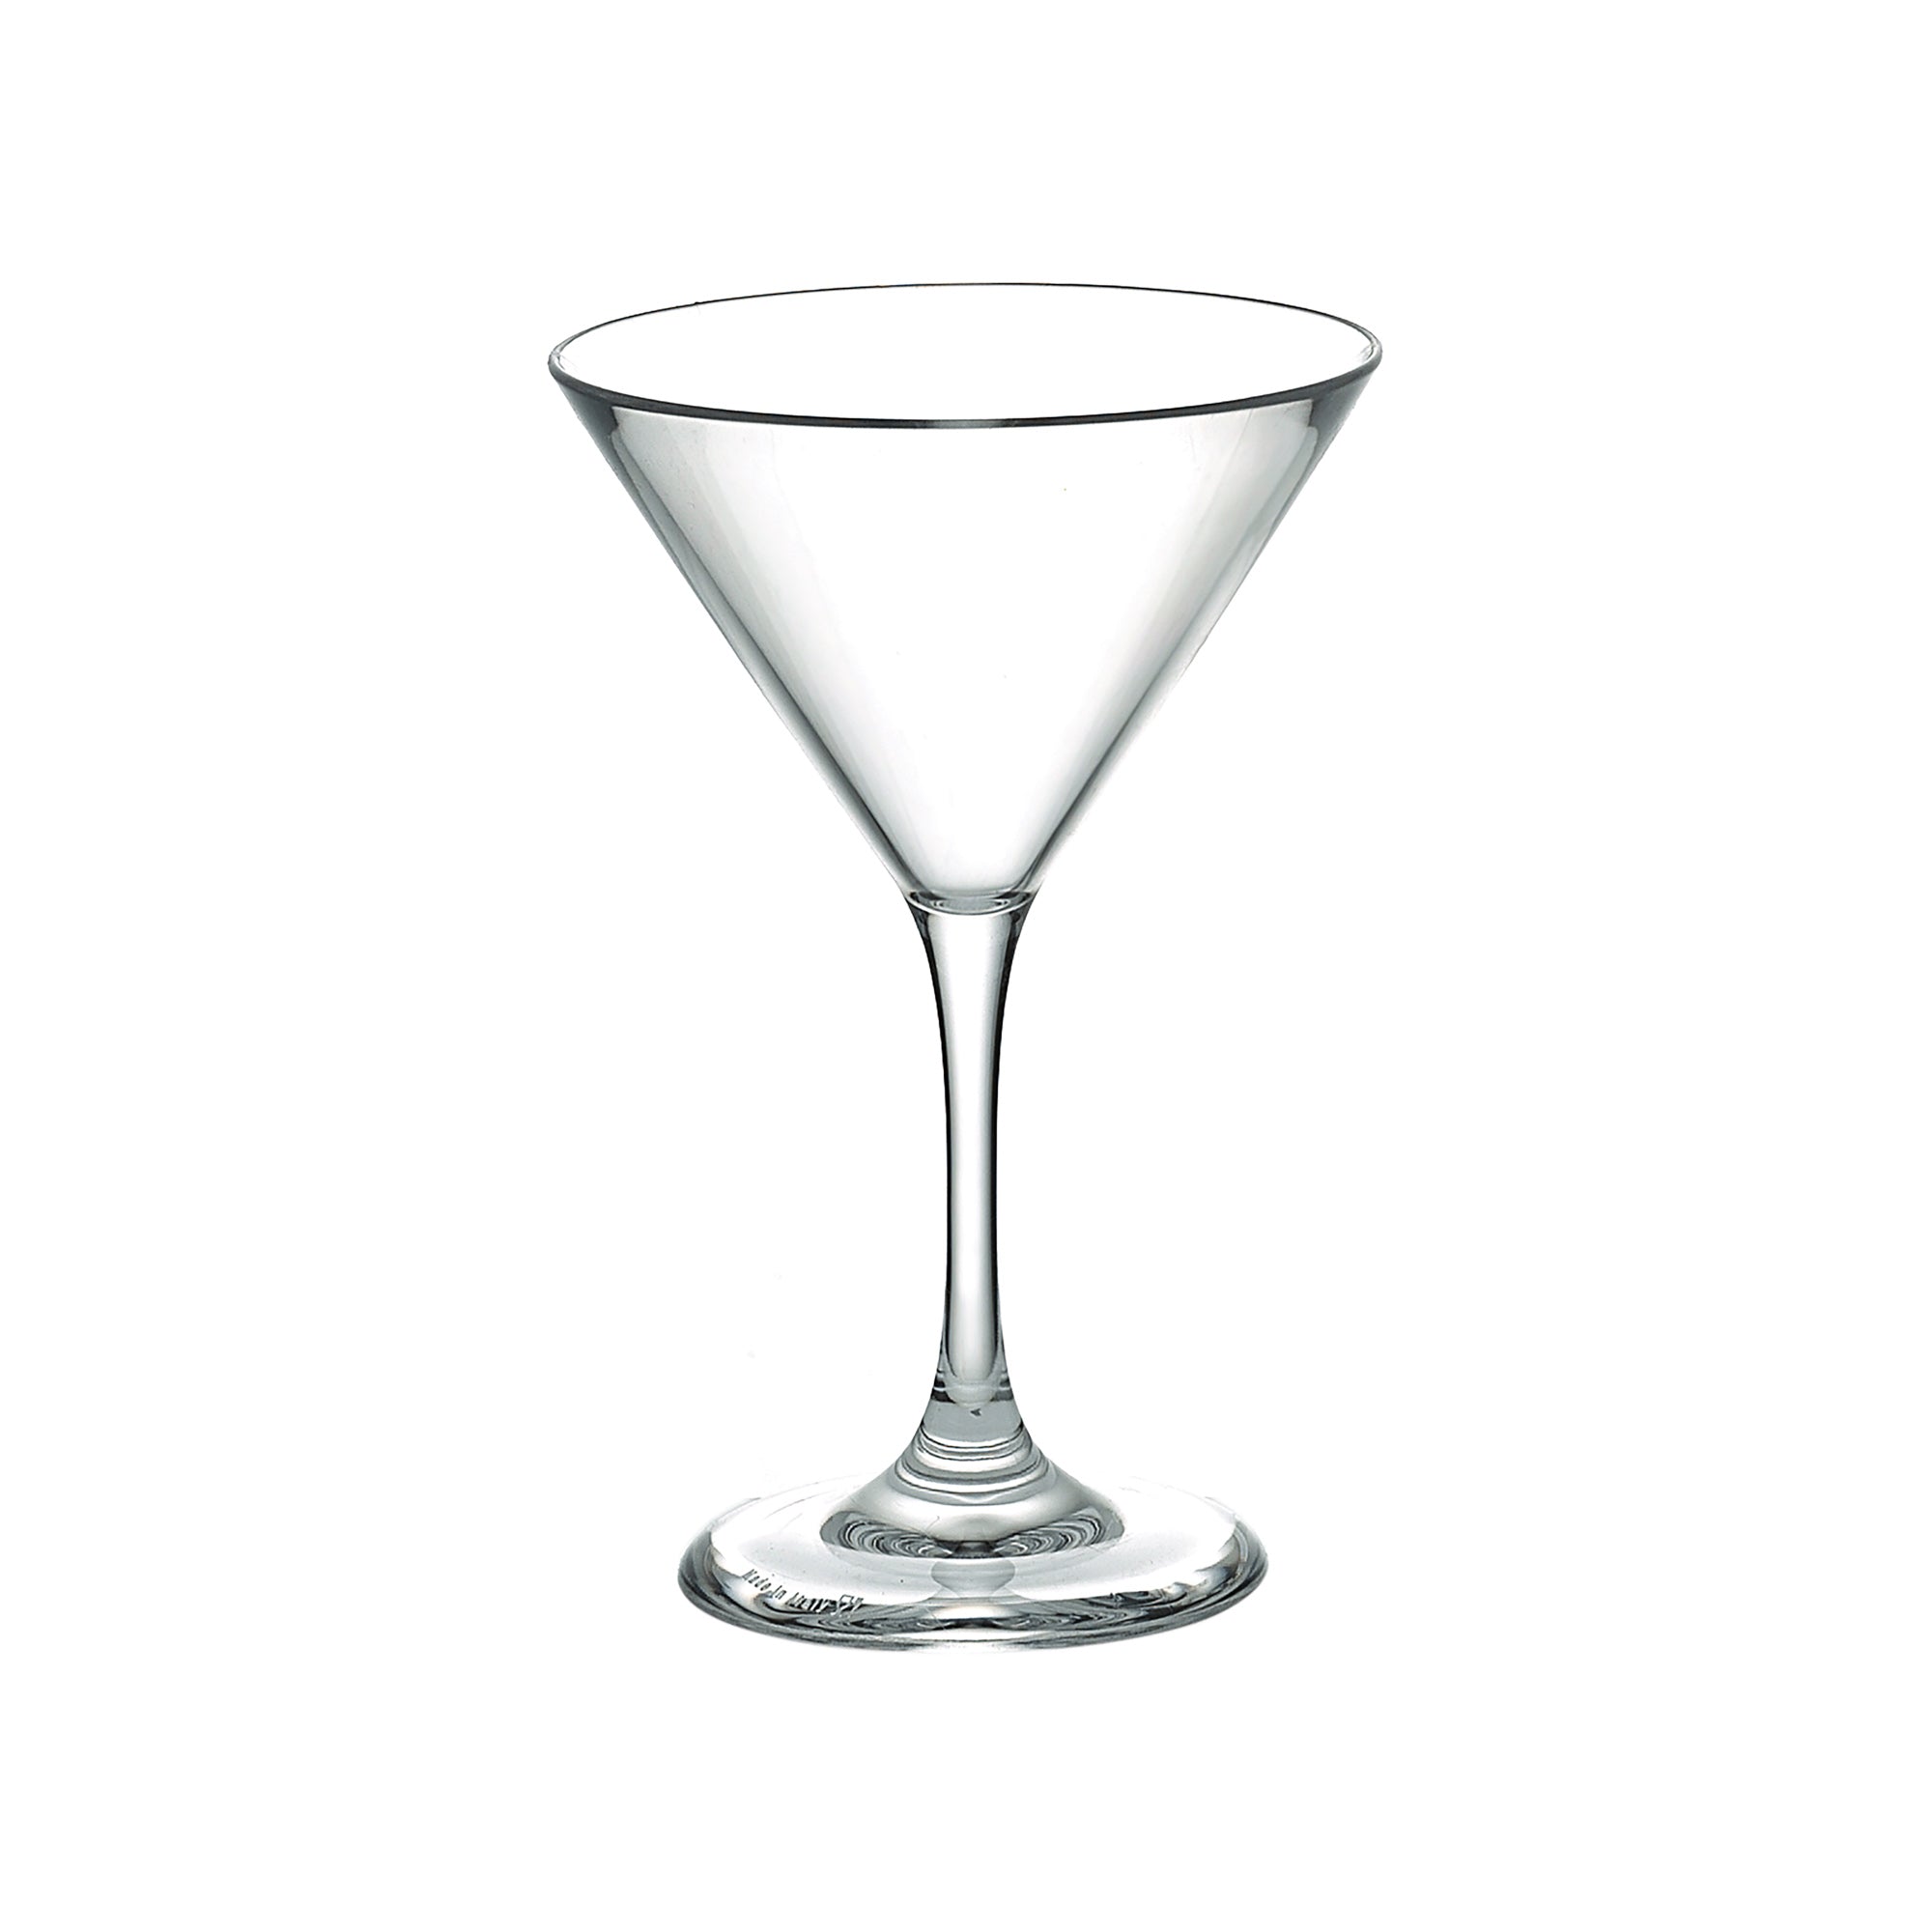 COCKTAIL GLASS "HAPPY HOUR"